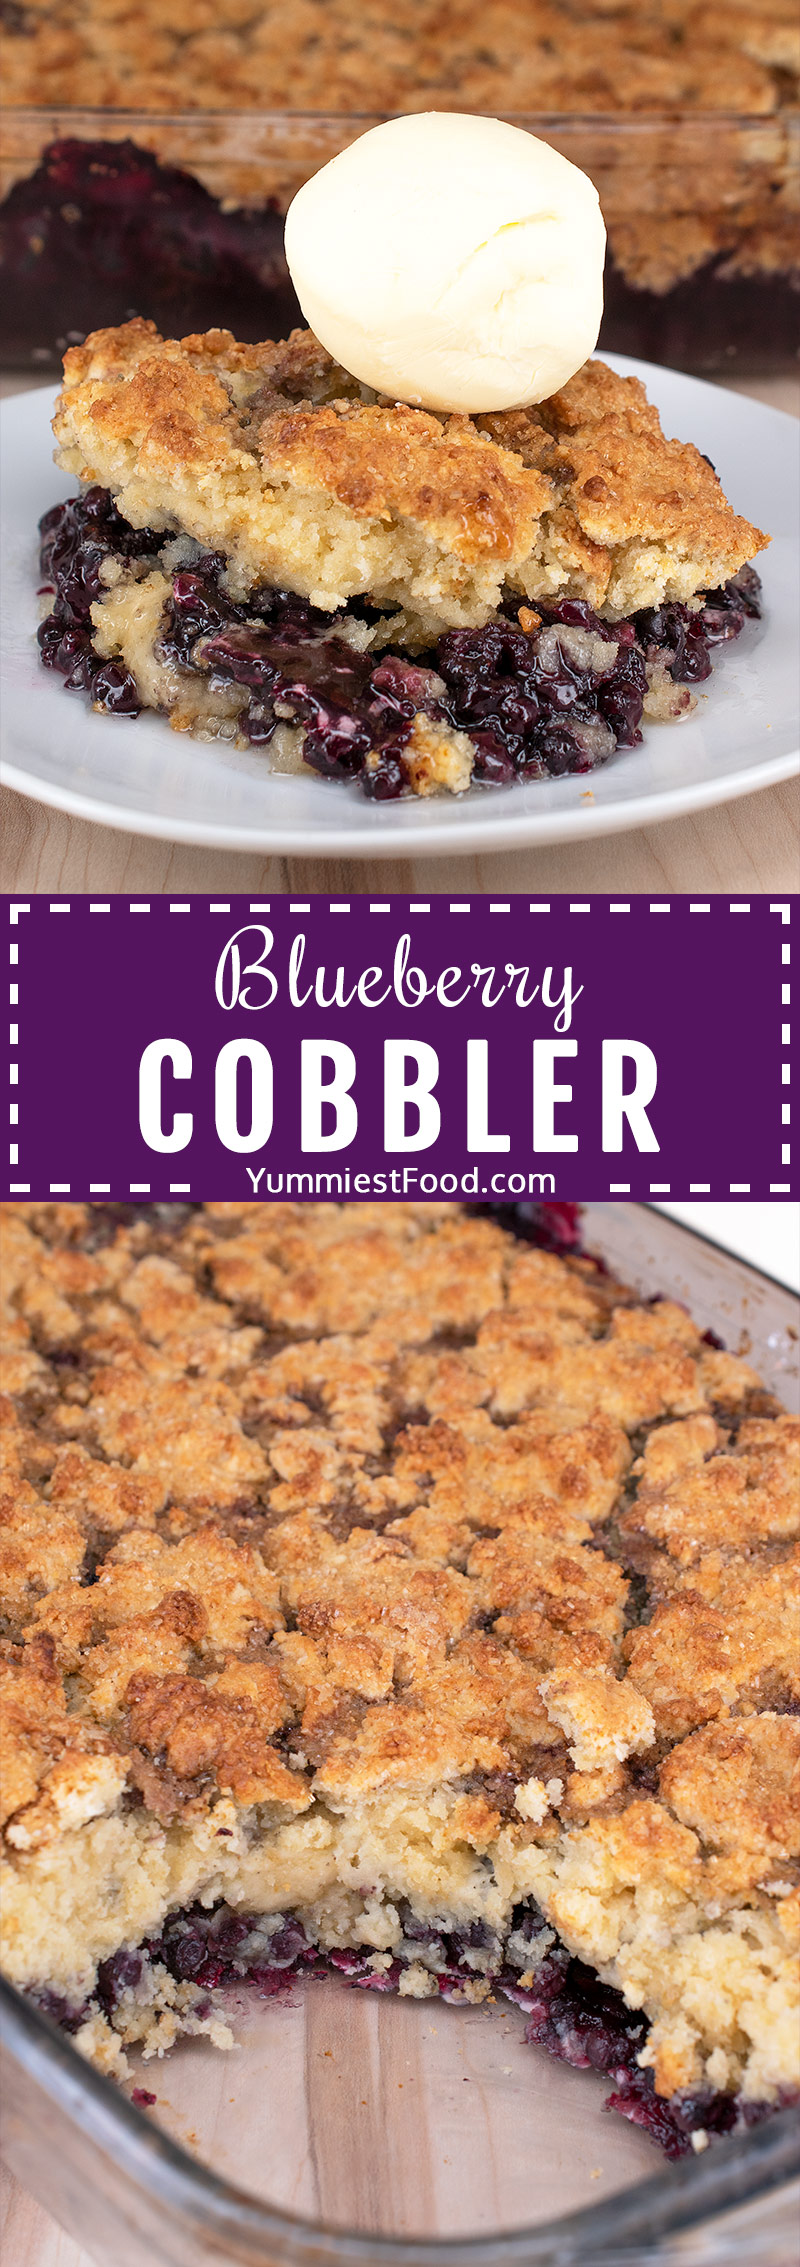 Blueberry Cobbler - A light, flaky biscuit topping, hiding those plump and succulent blueberries